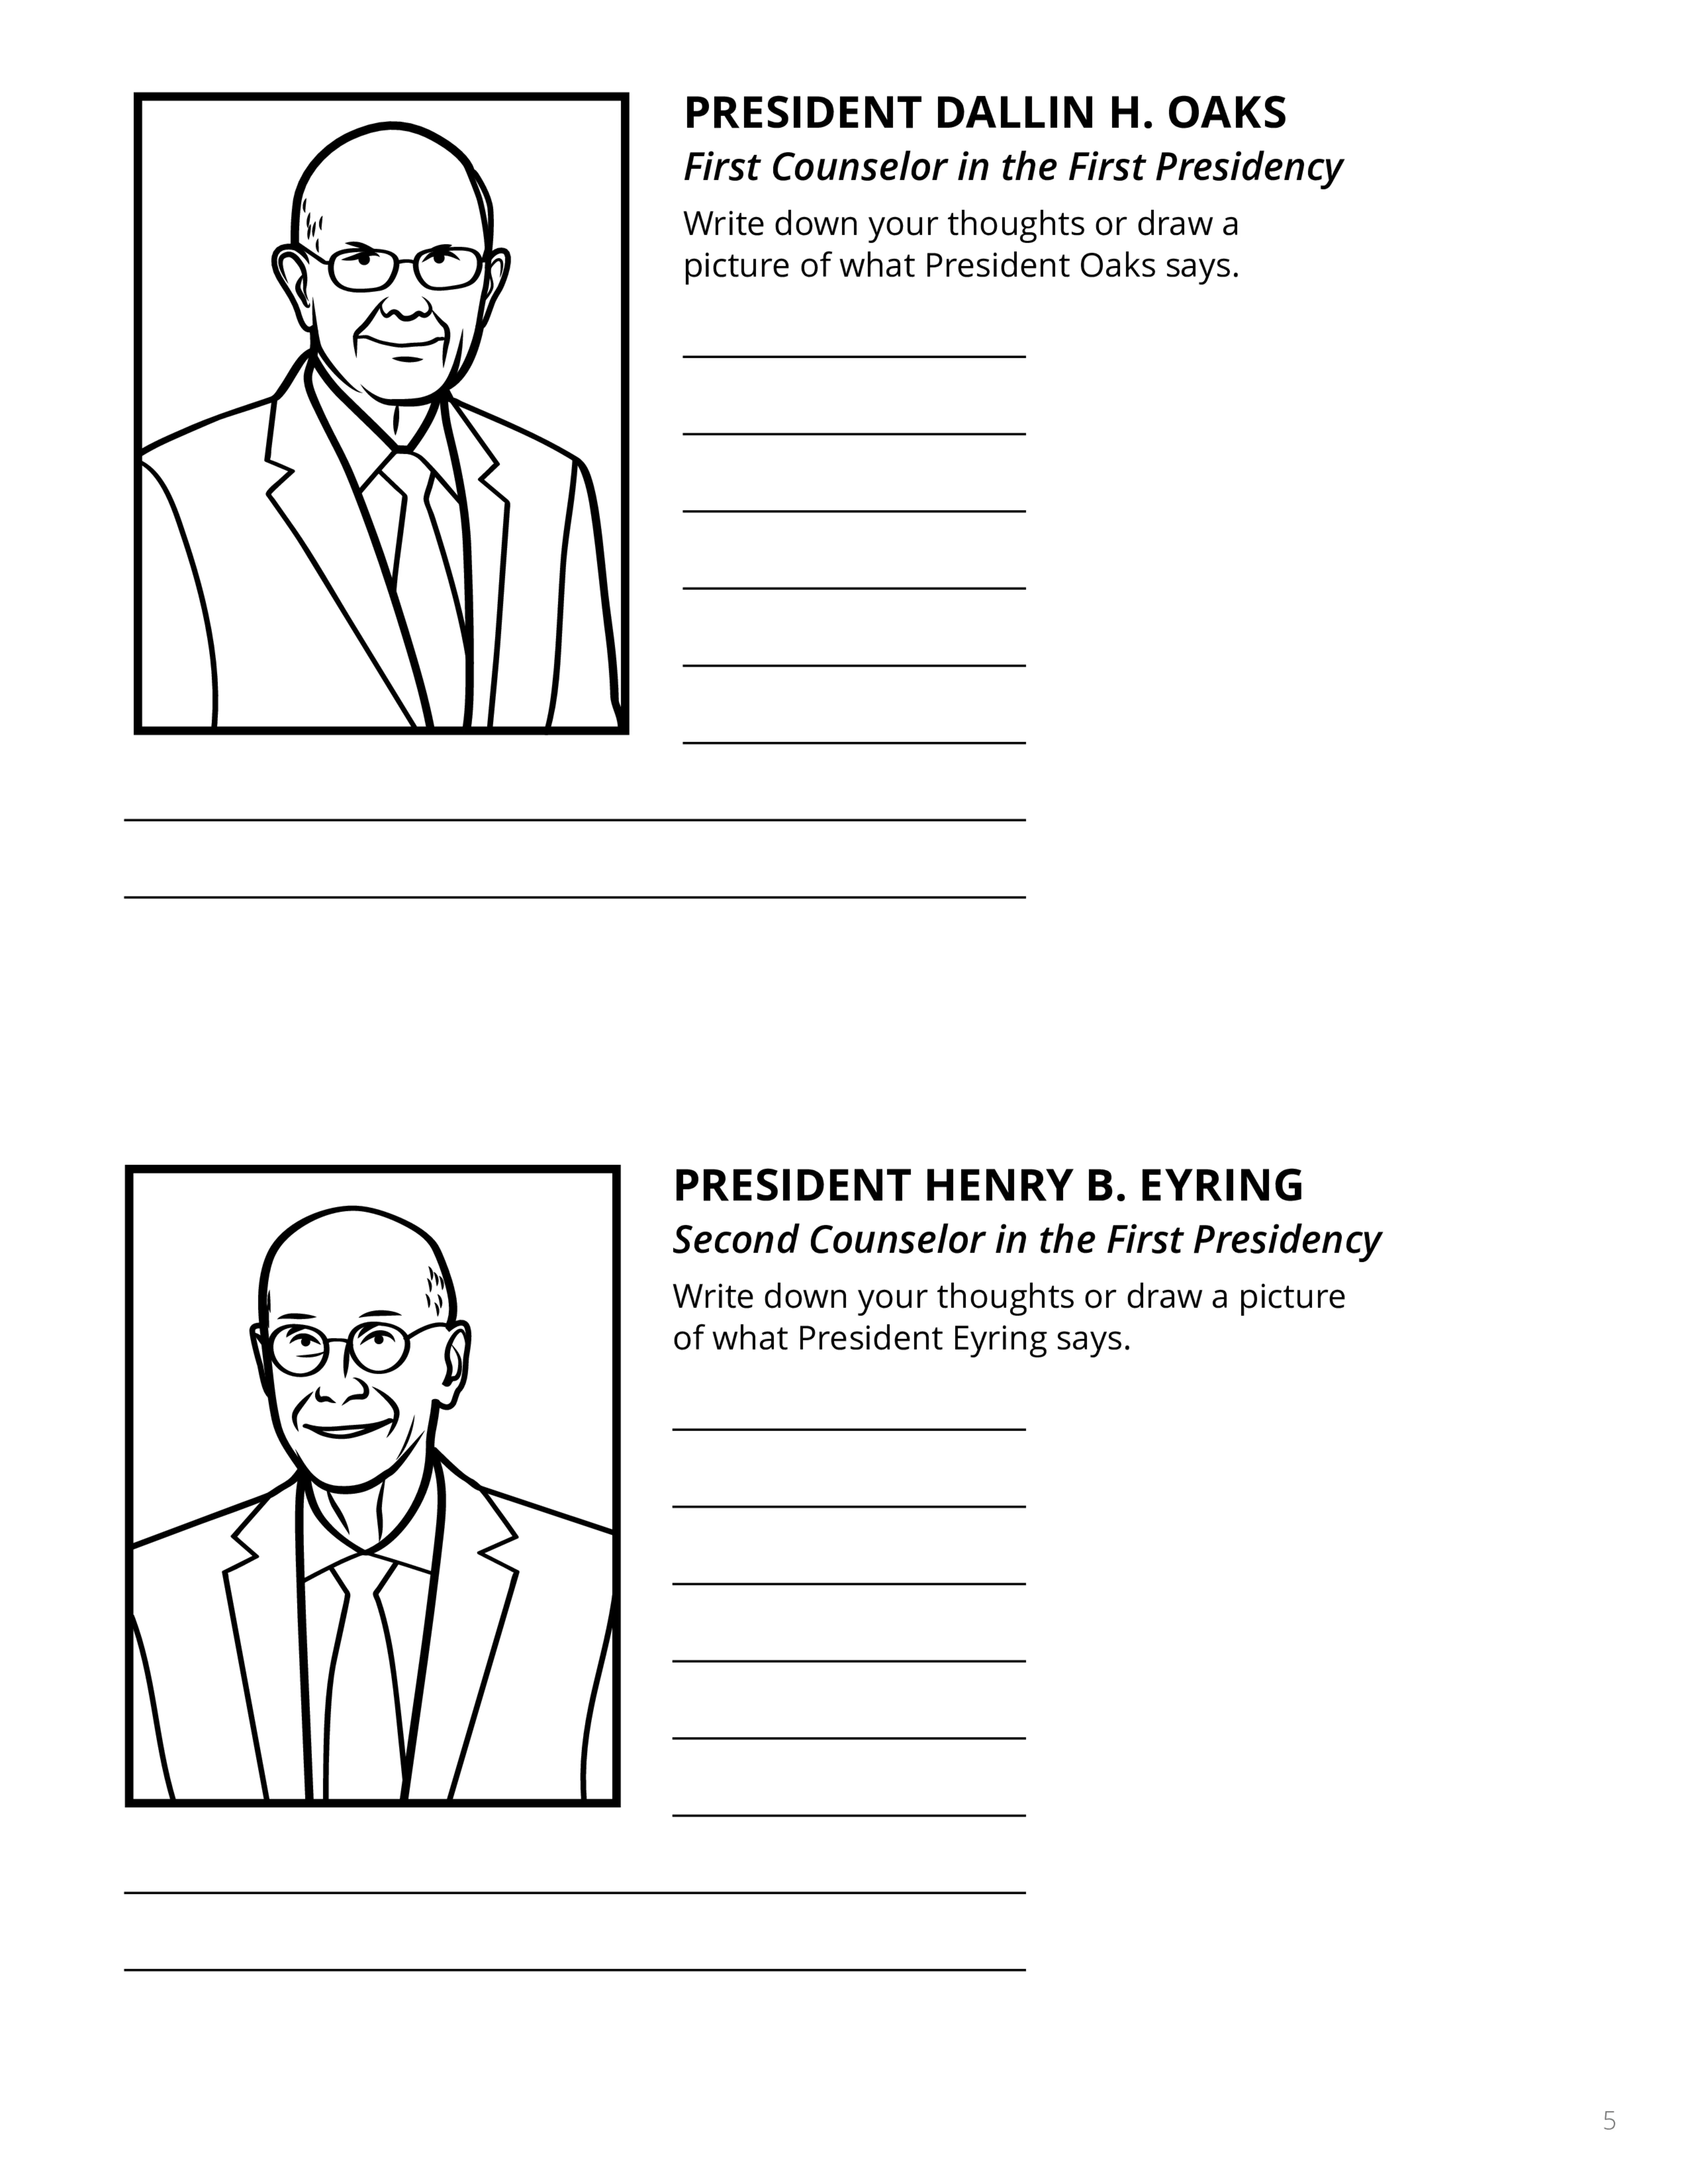 An activity page to encourage children to listen and write down thoughts or draw a picture of what Dallin H. Oaks and Henry B. Eyring say.